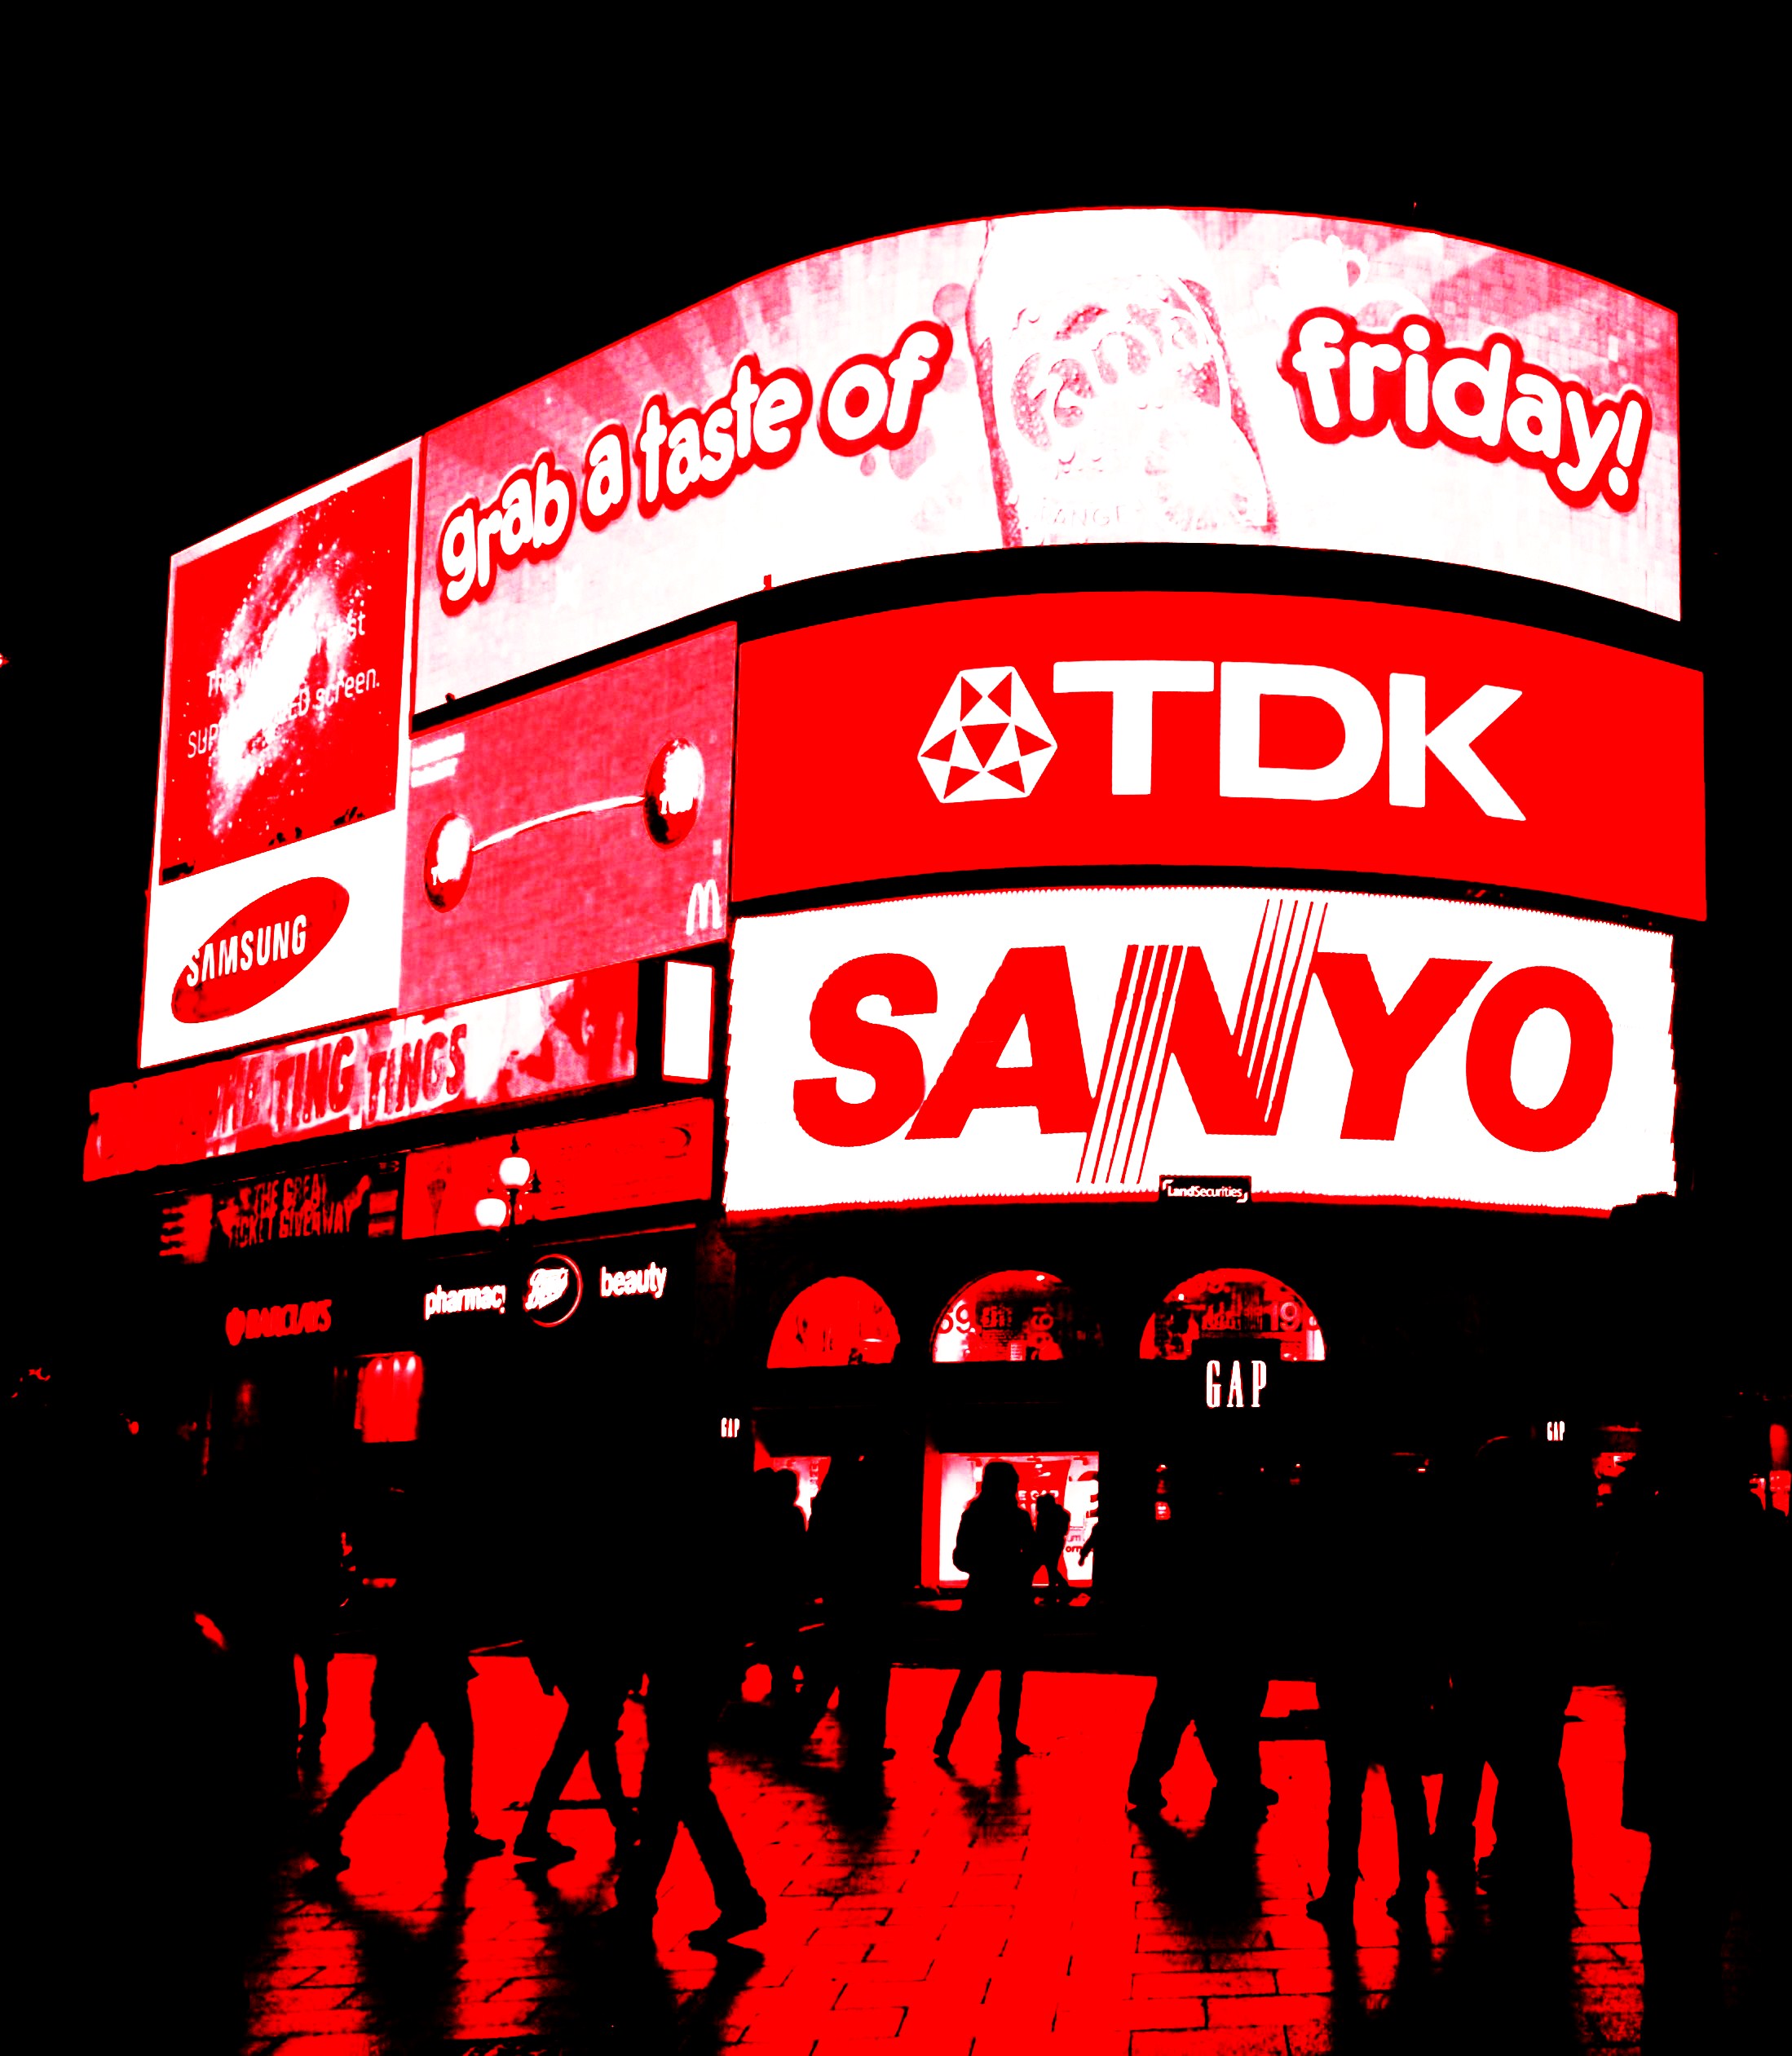 Piccadilly Circus London.jpg Piccadilly Circus Photo at Night, Romantic Photos Of Piccadilly Circus London, Piccadilly Circus Pop Art Images, Piccadilly Circus Images, by PopArtMediaProductions